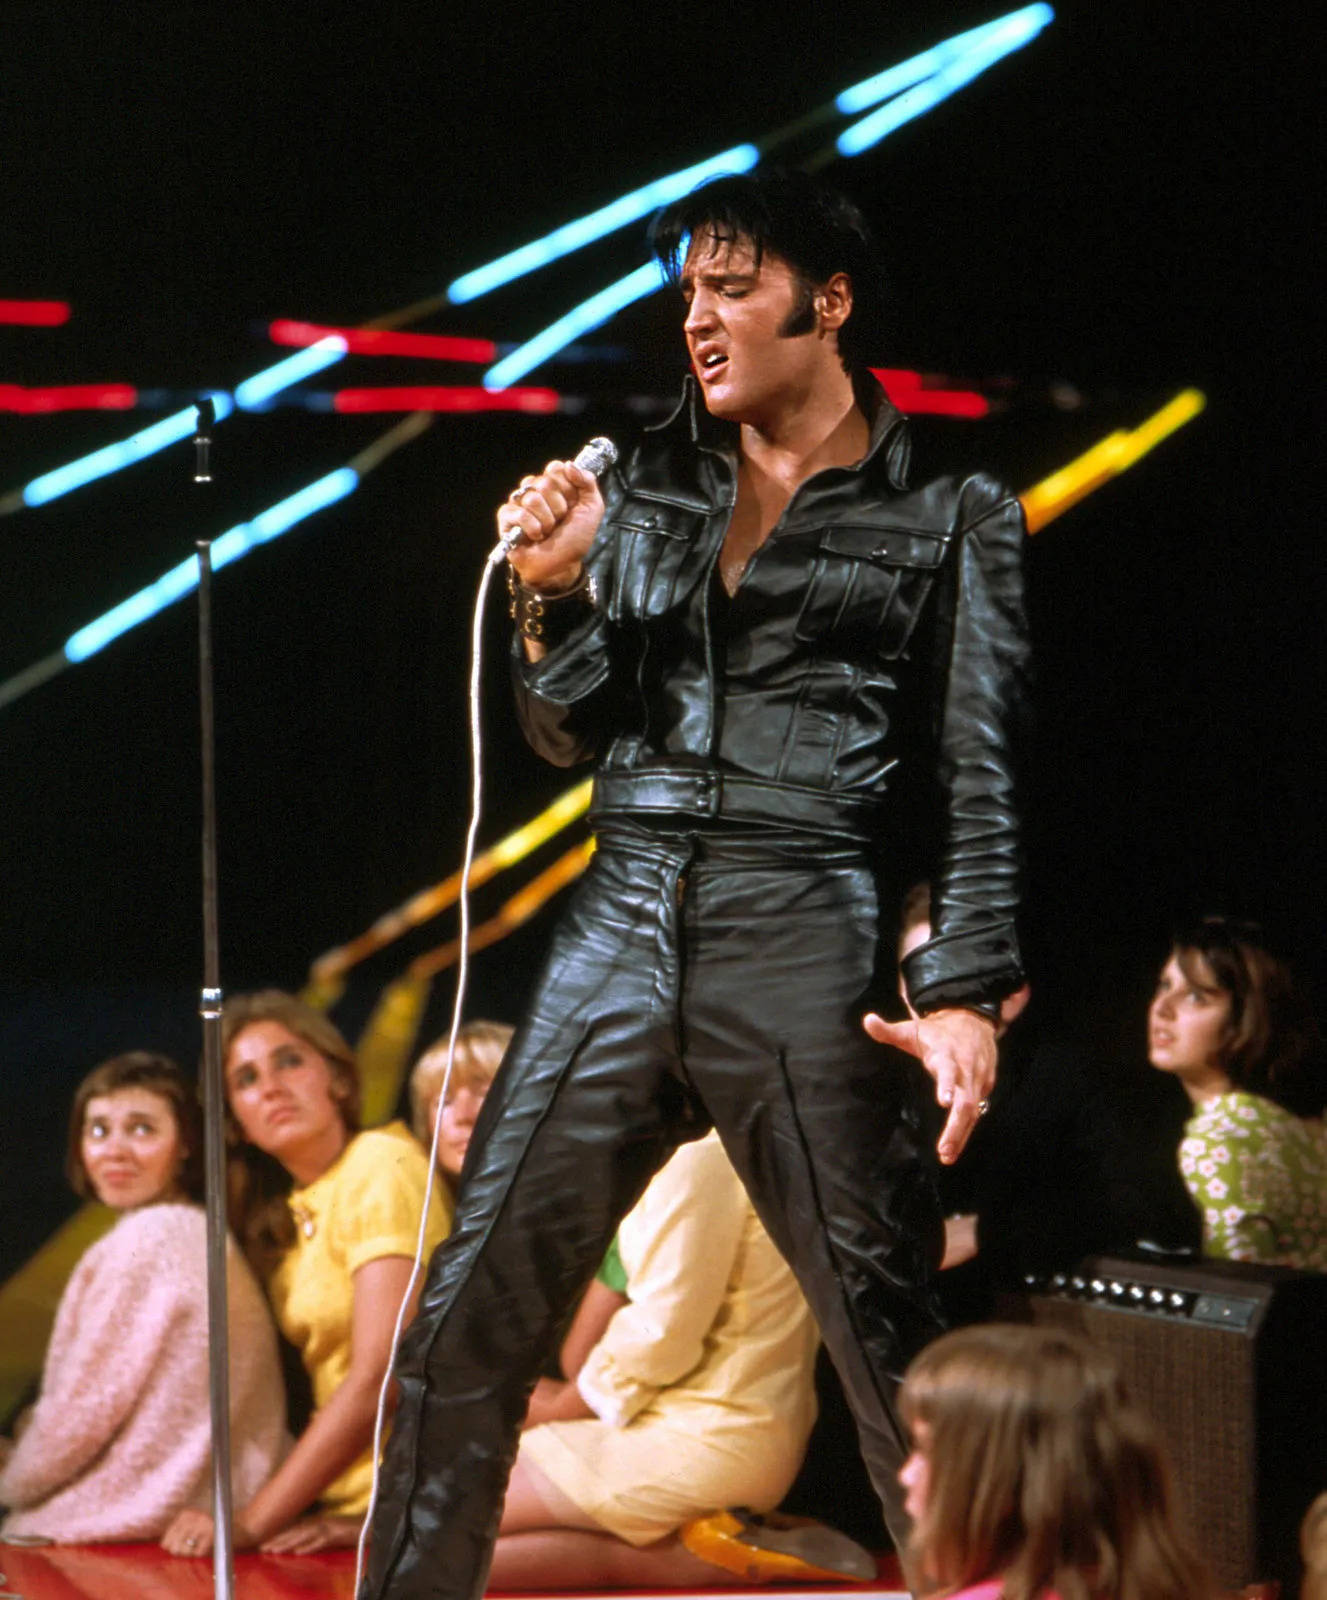 Elvis Presley In Leather Attire Background